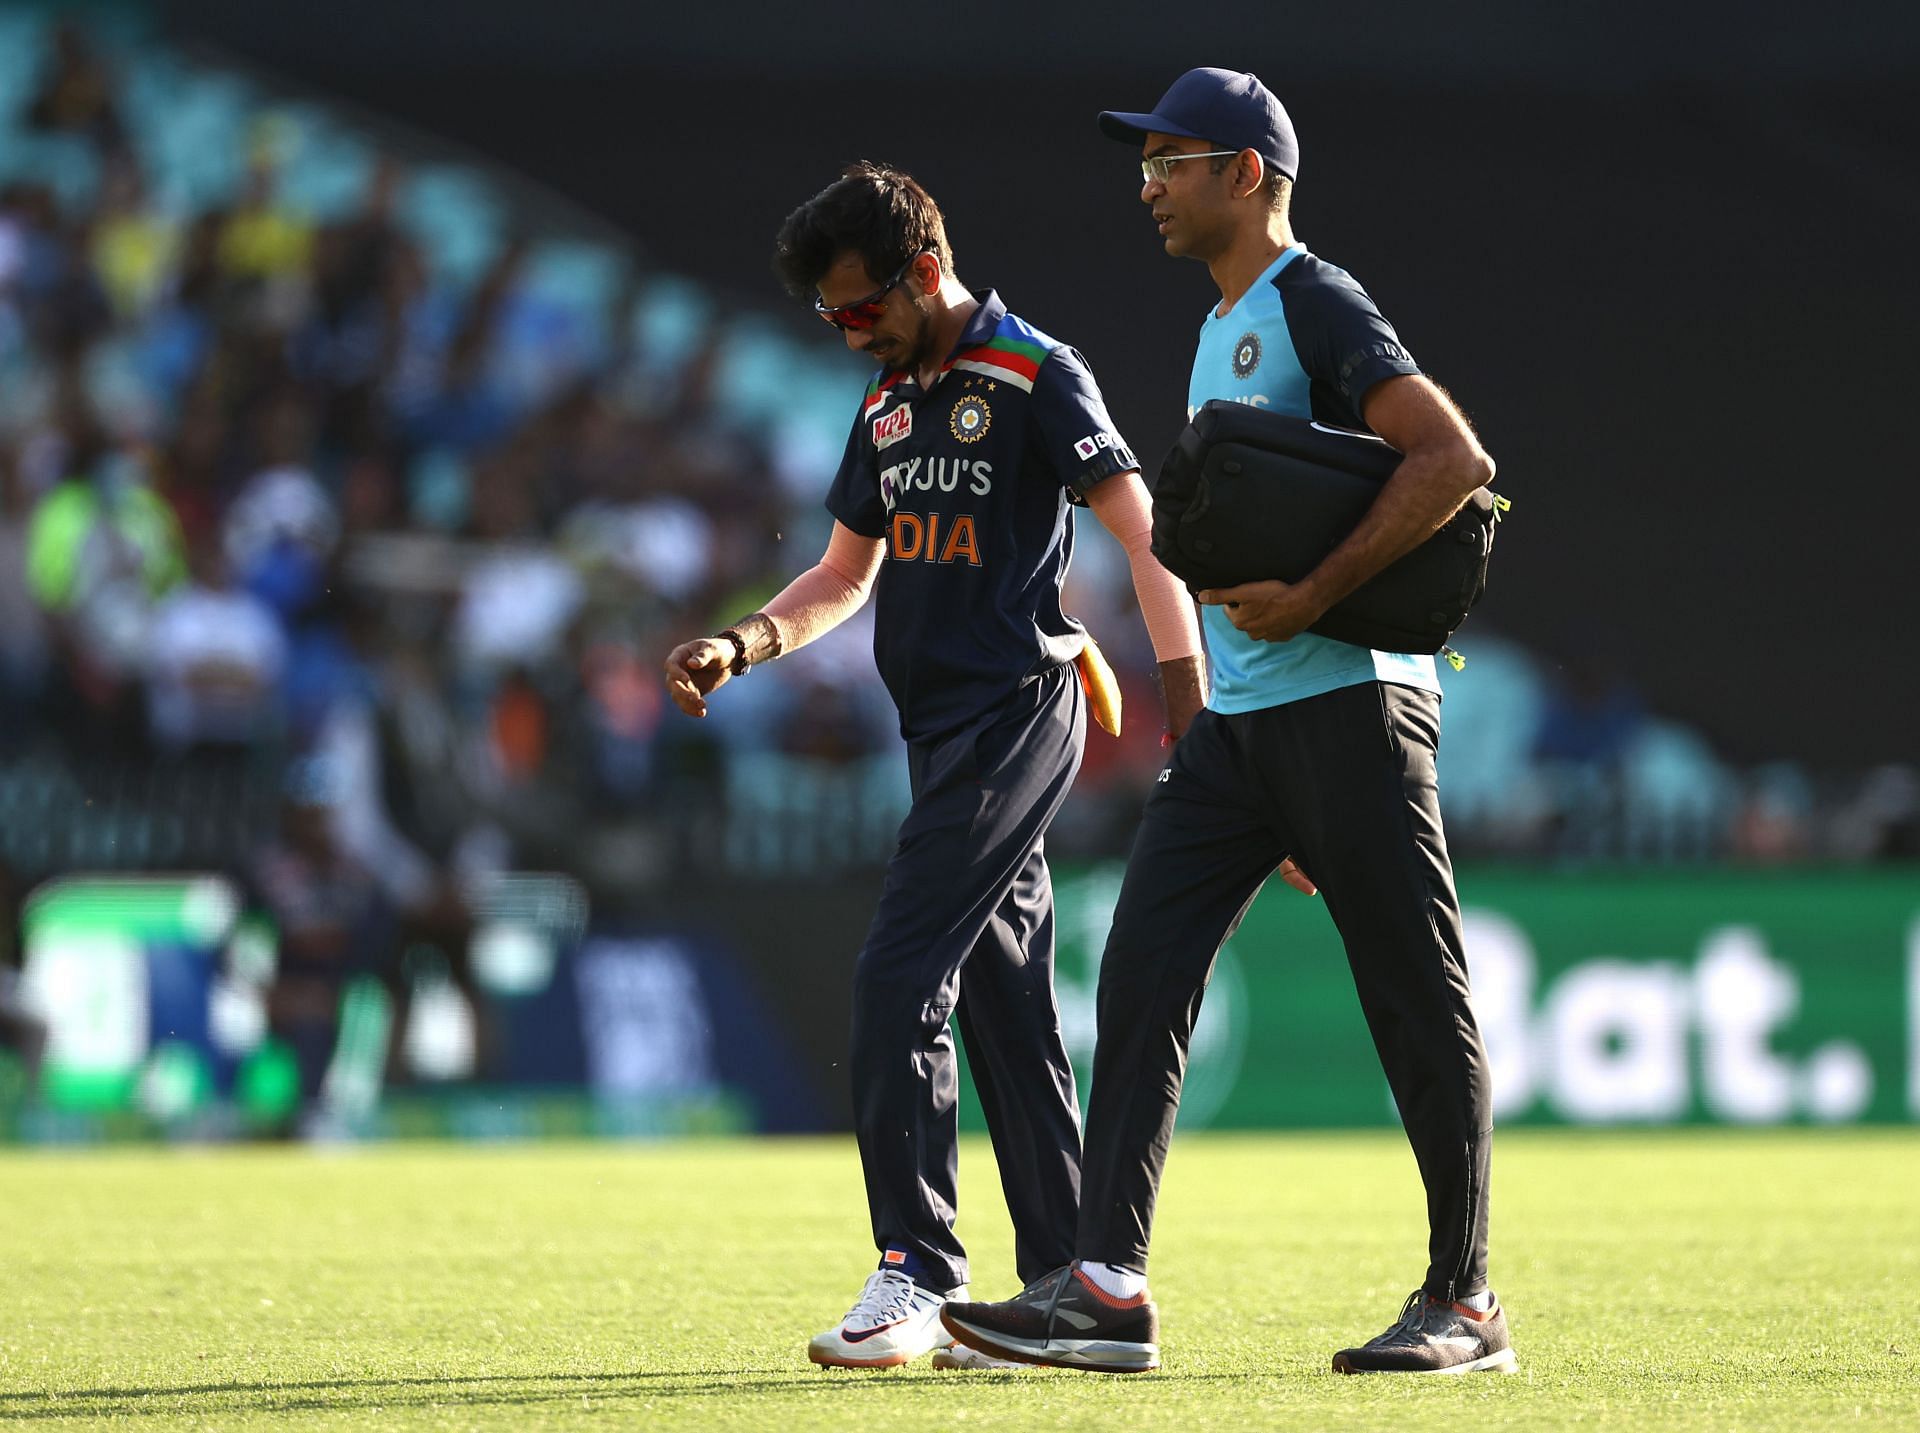 Yuzvendra Chahal was not picked for the first T20I against New Zealand